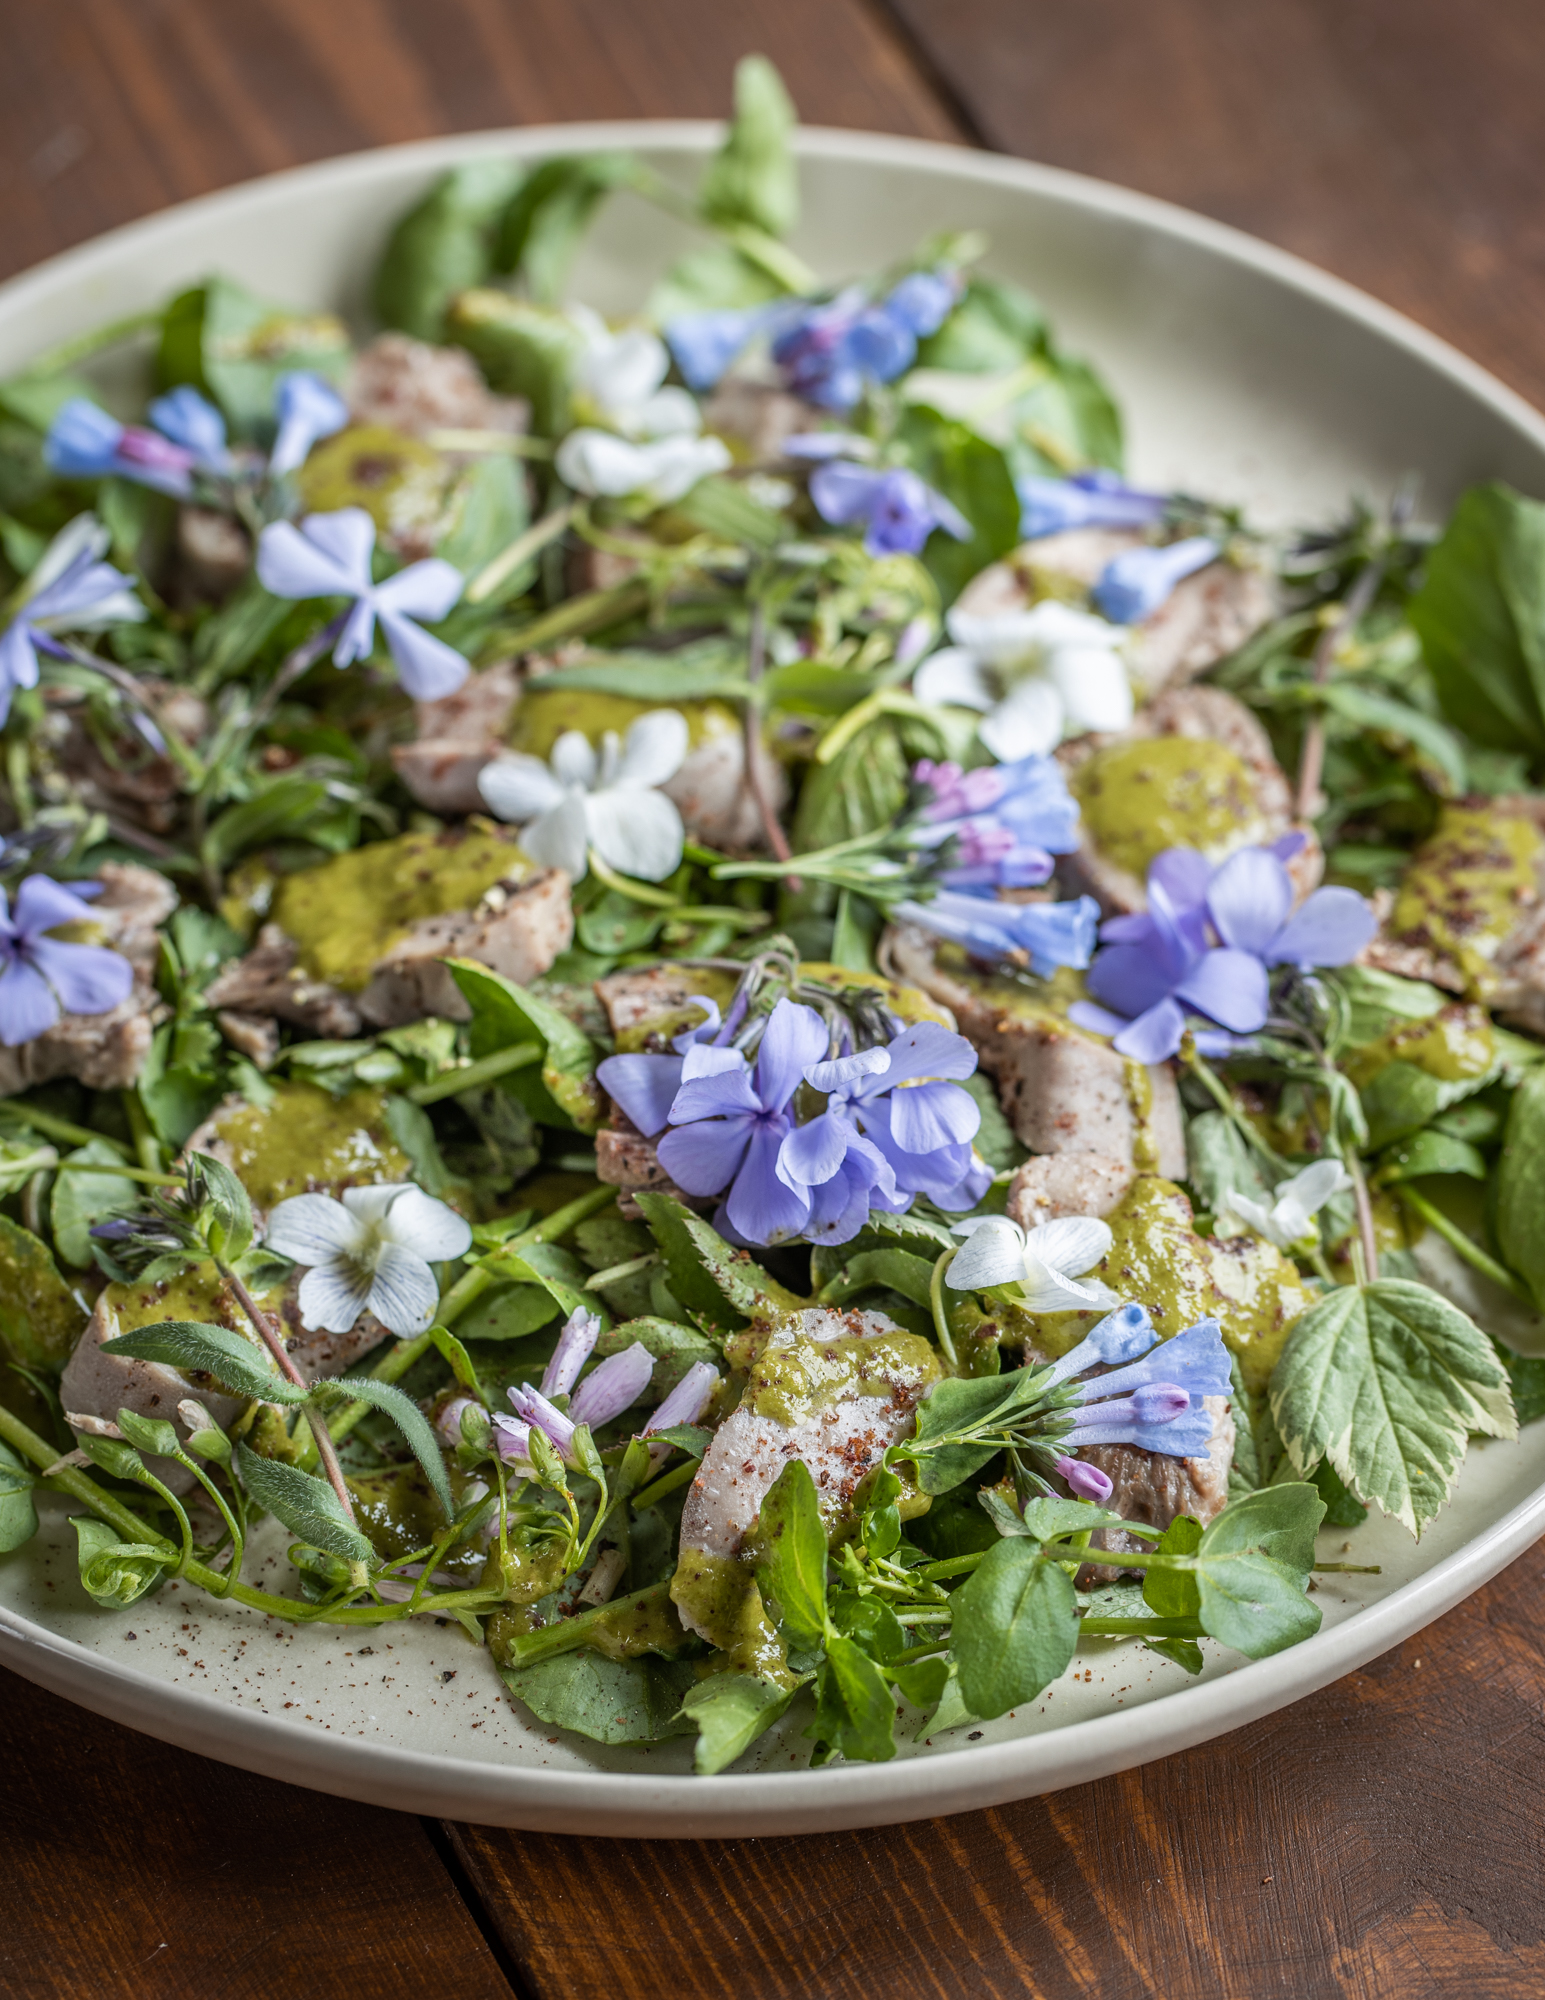 Goat tongue salad with salsa verde, fresh greens and wildflowers